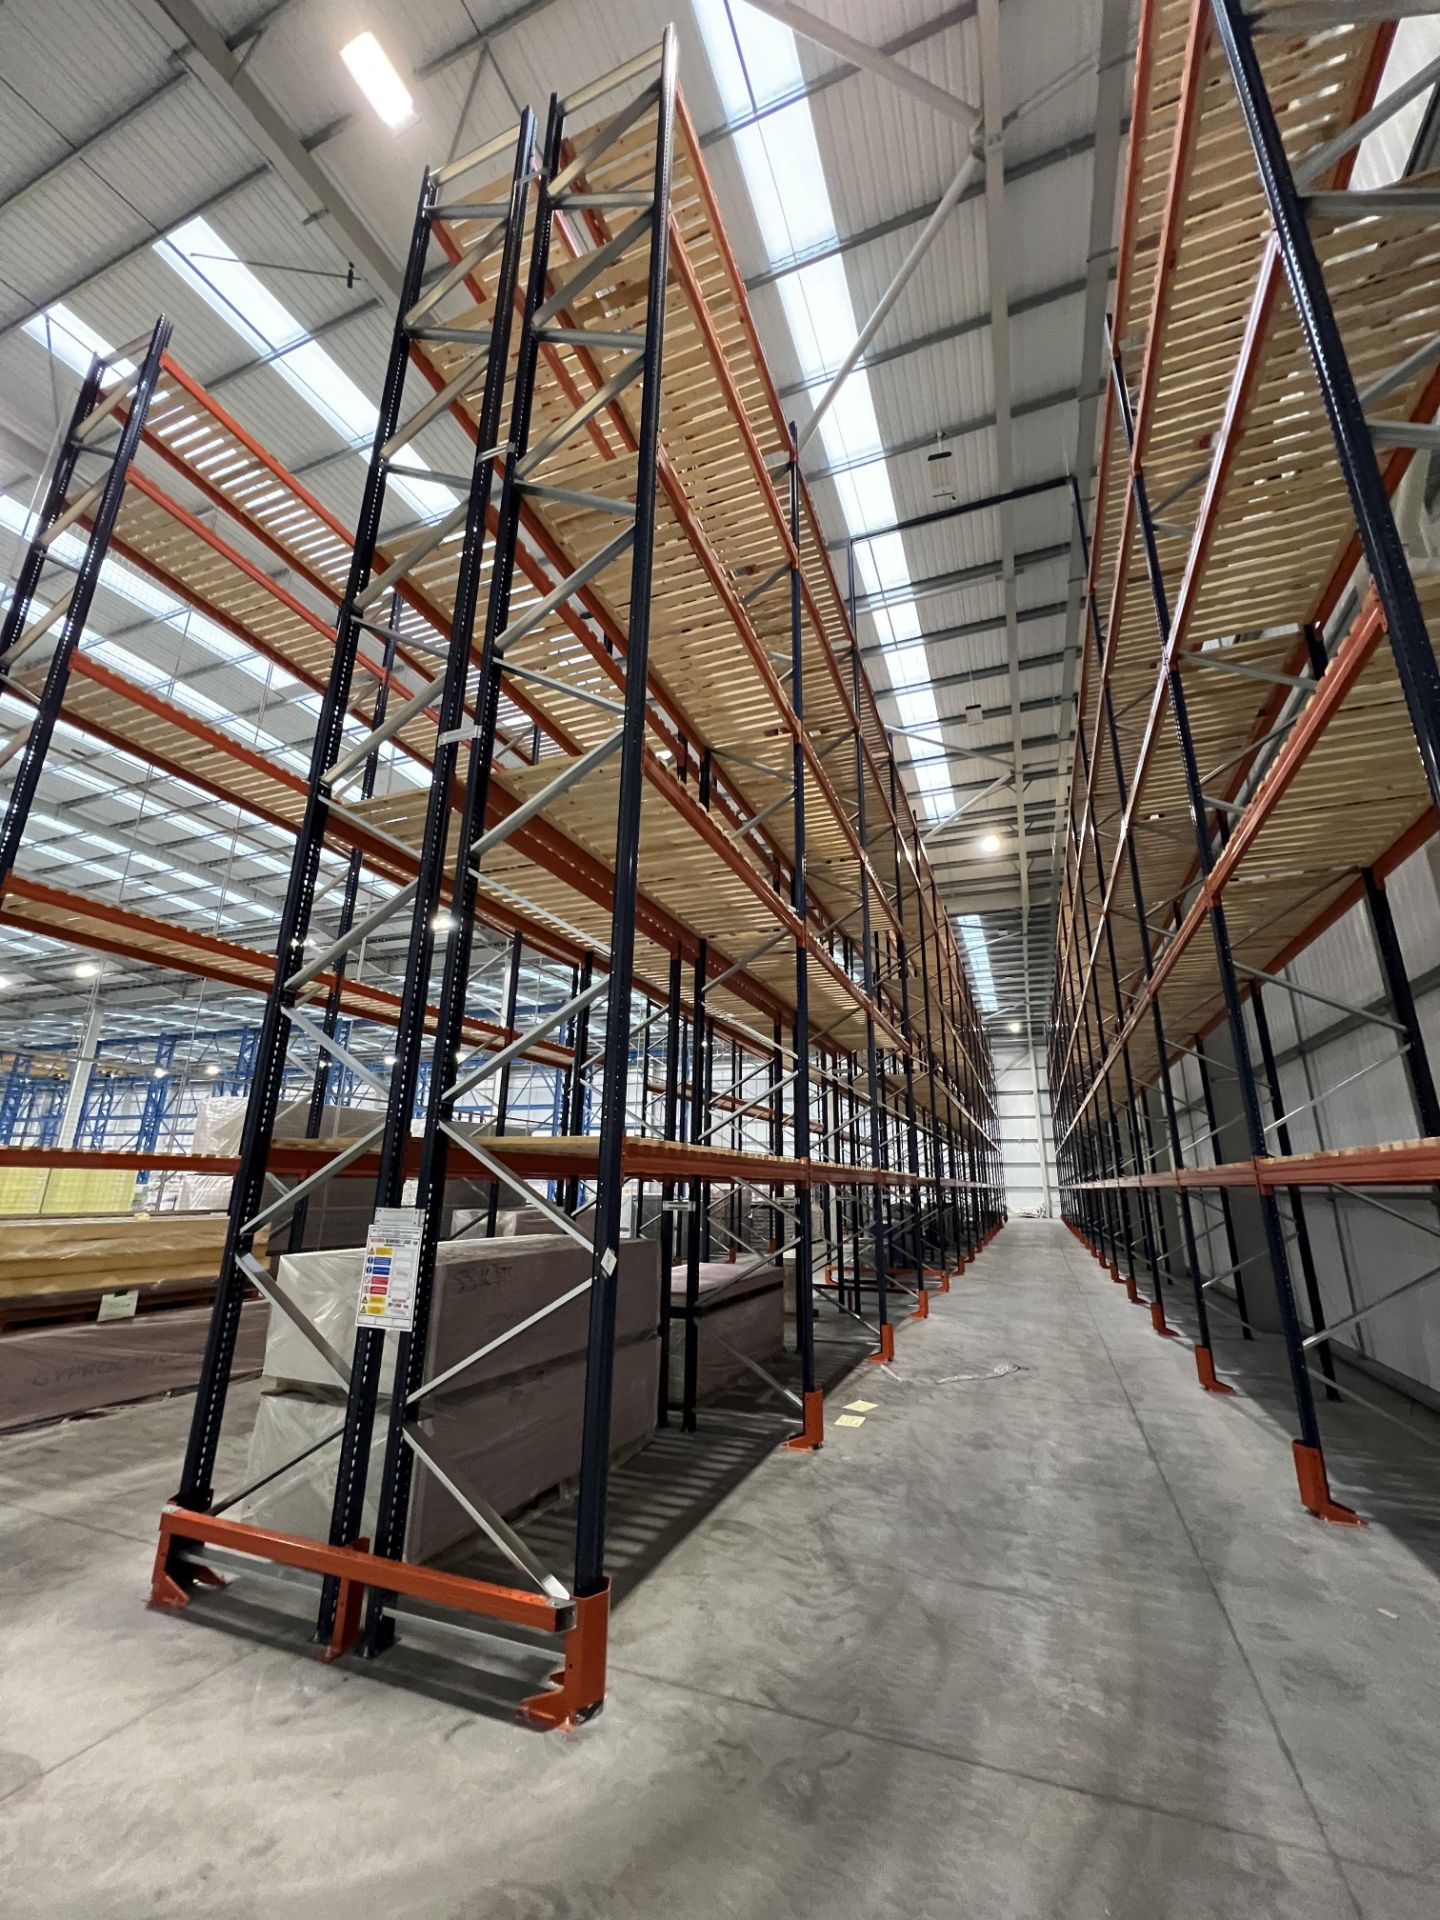 Mecalux M-22P high bay boltless pallet racking (2021), consisting of two back to back 49.7 metre